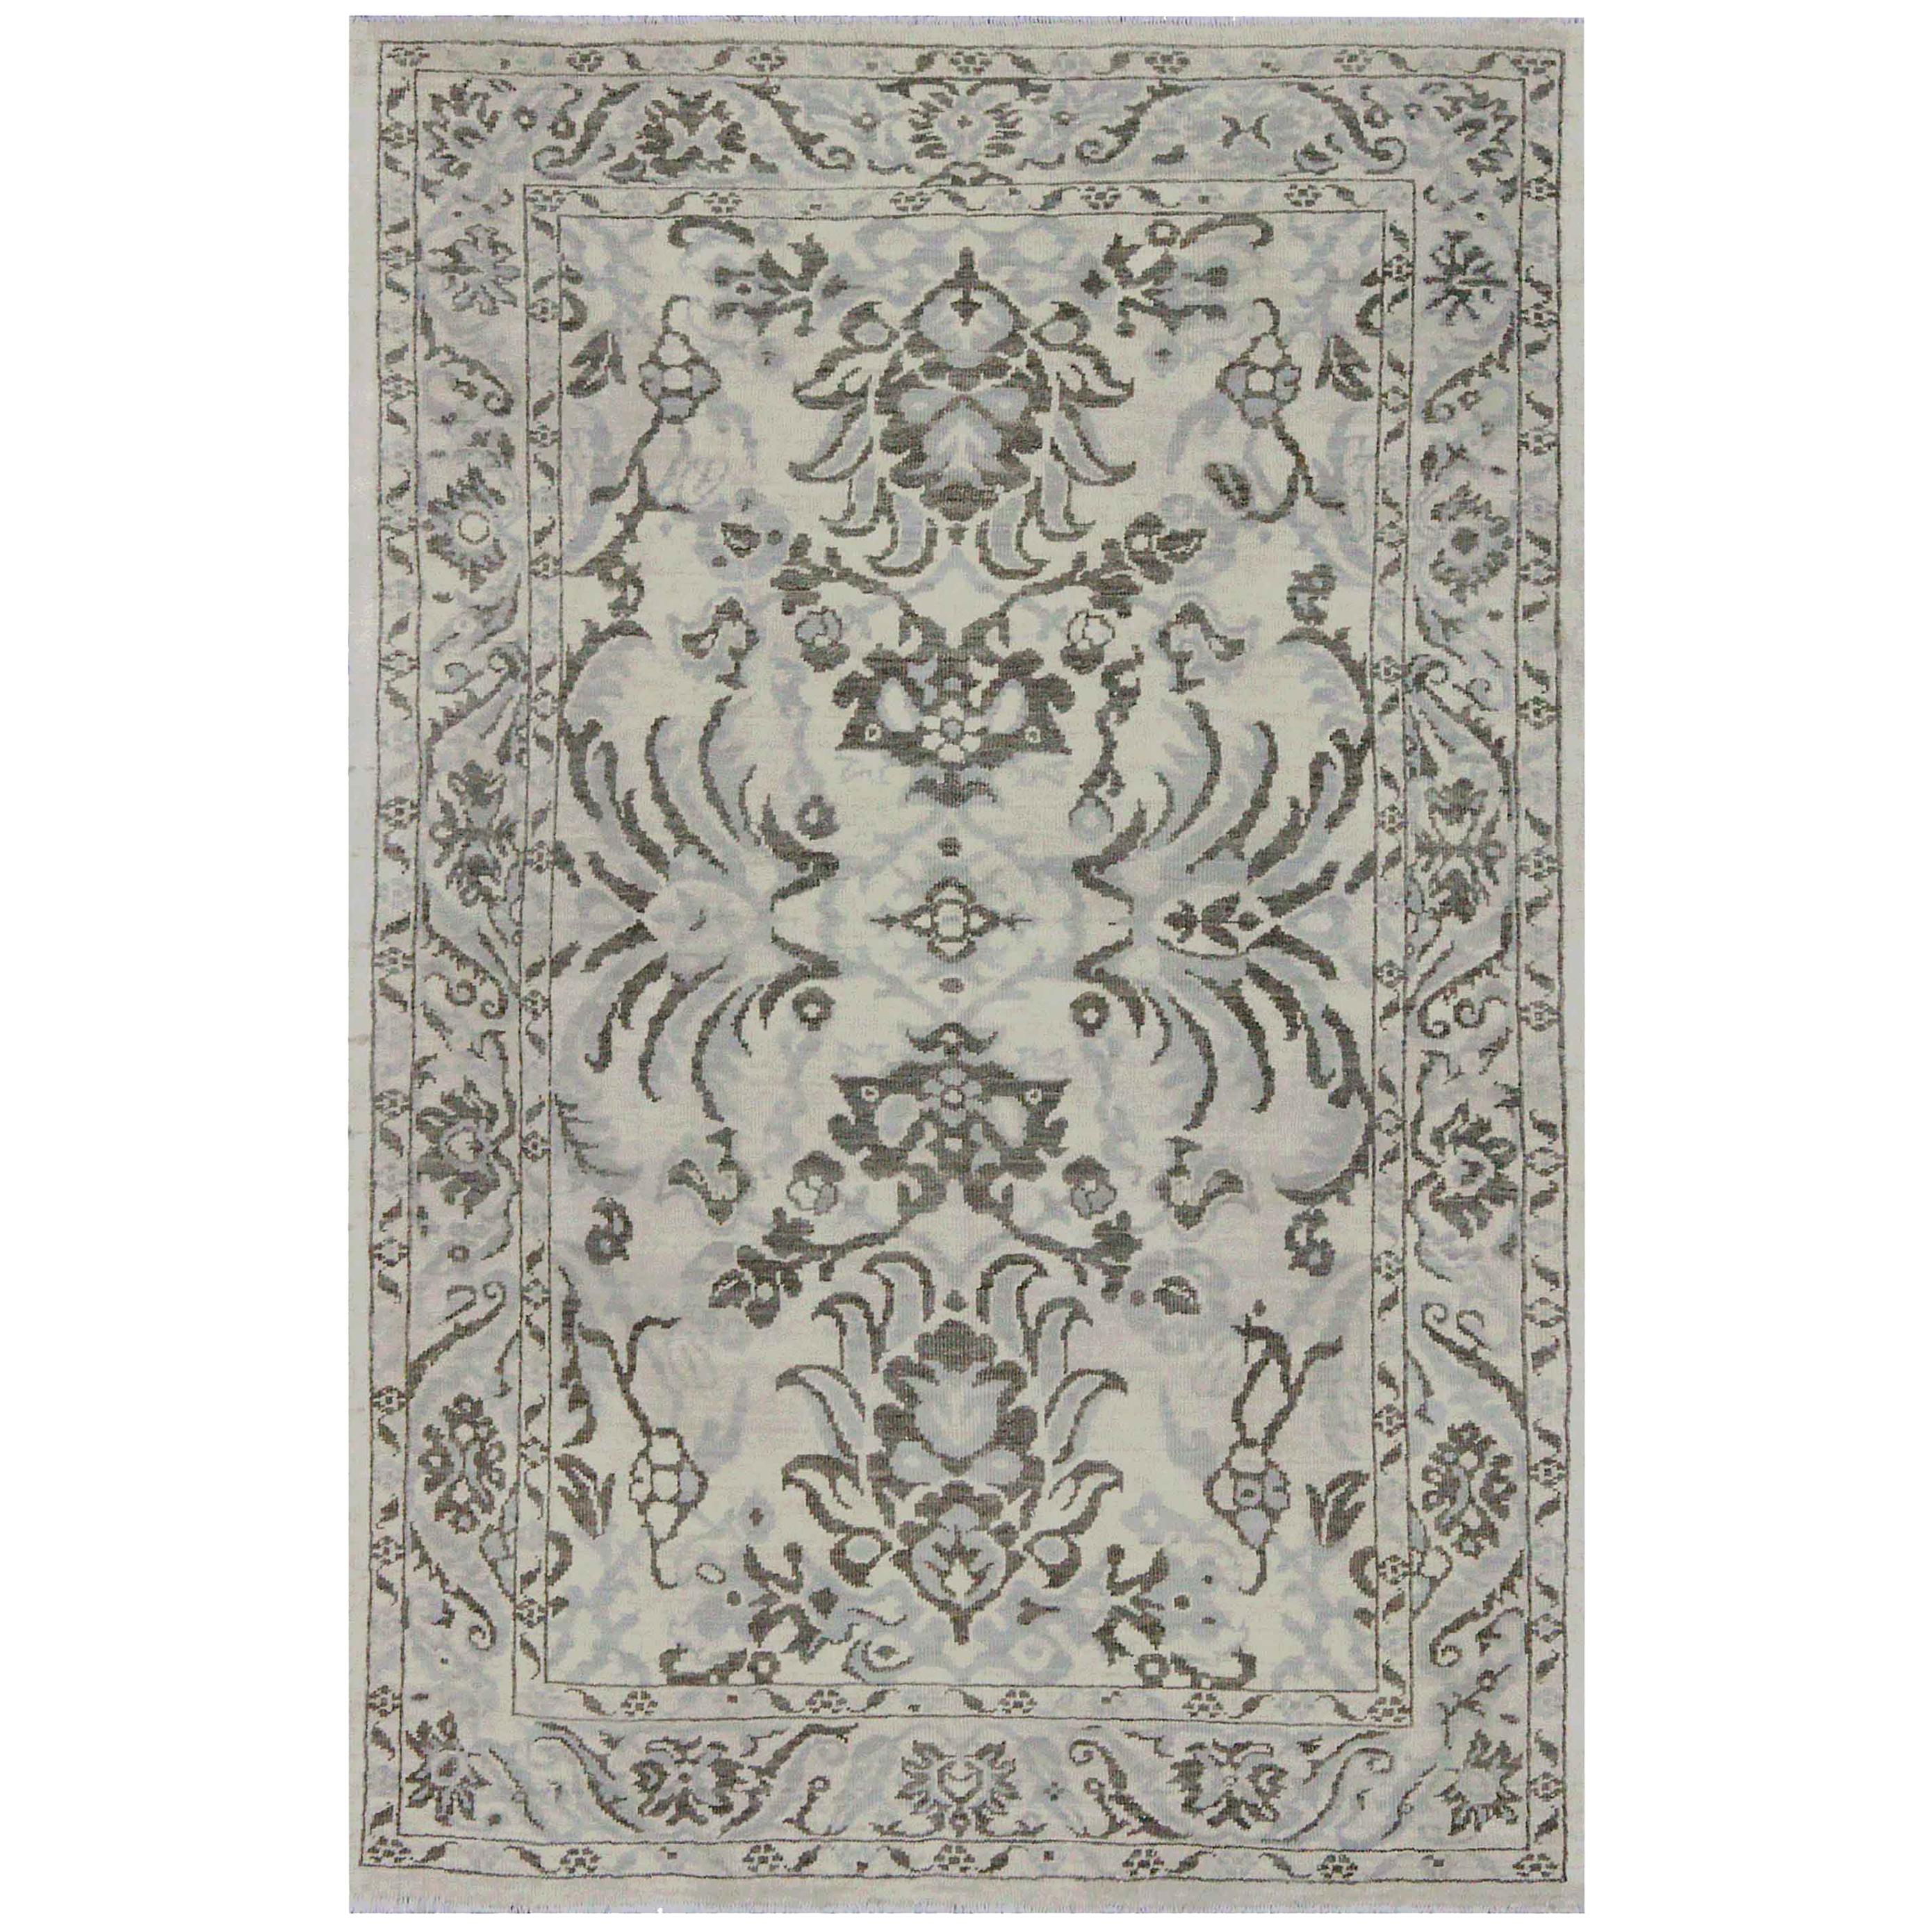 New Turkish Rug Sultanabad Design with Ivory and Gray Botanical Details For Sale